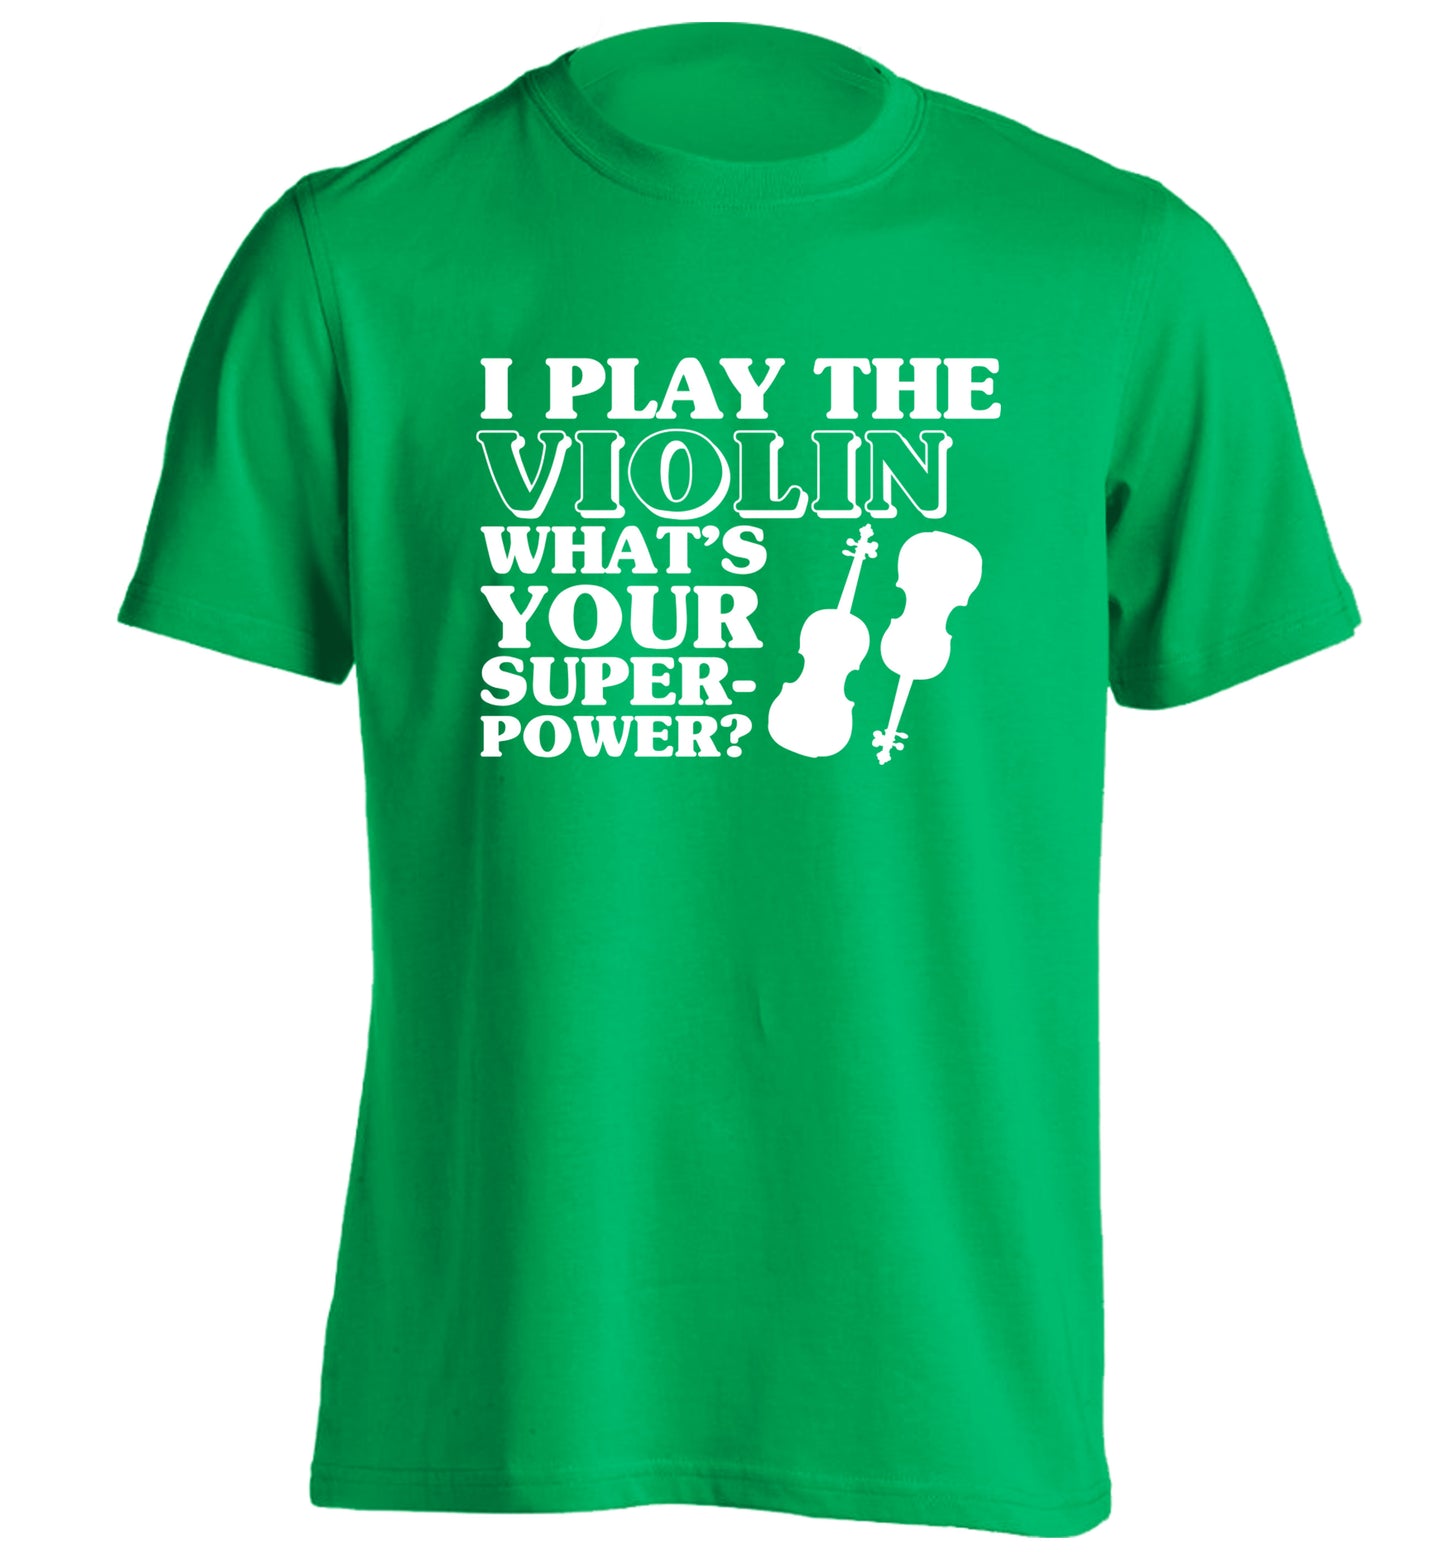 I Play Violin What's Your Superpower? adults unisex green Tshirt 2XL